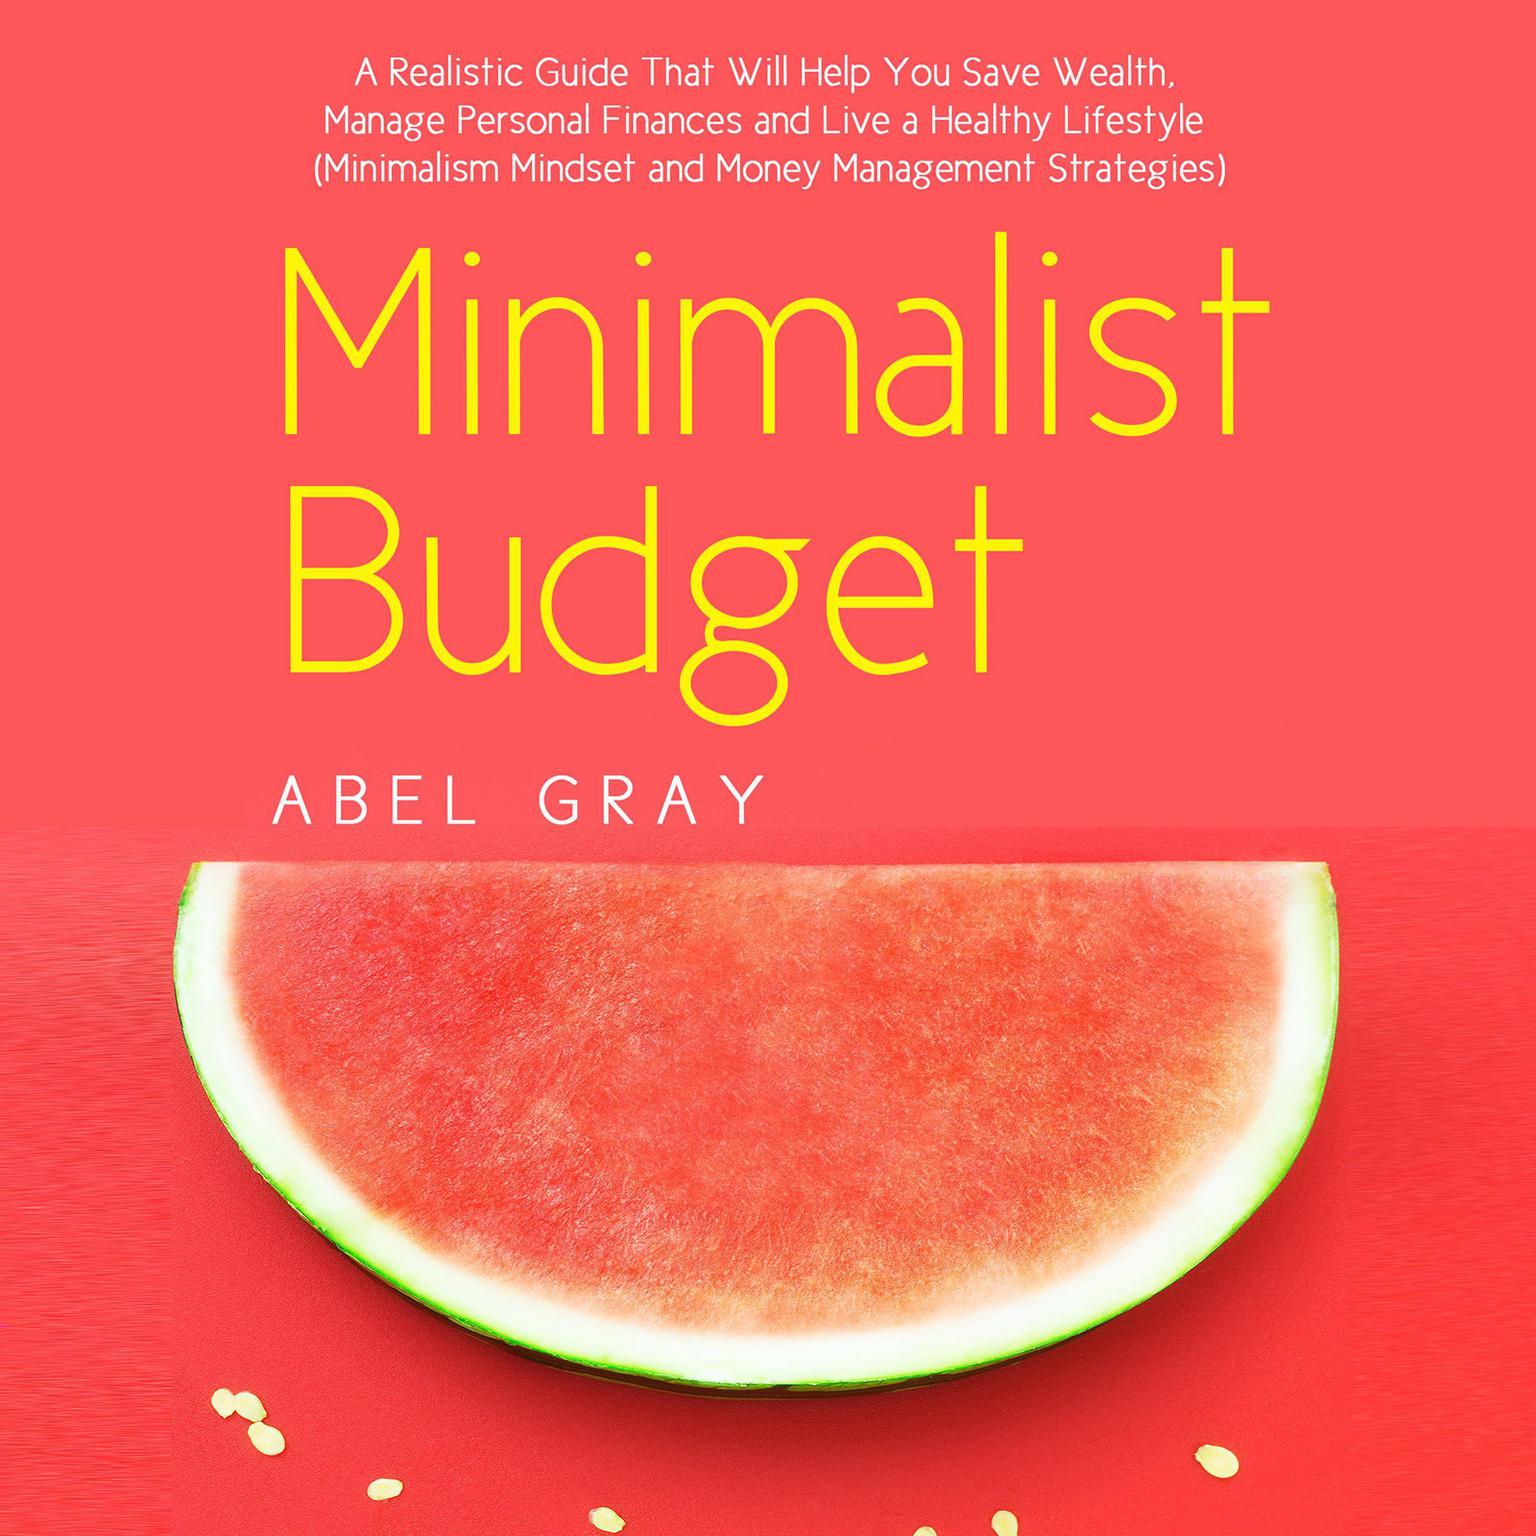 Minimalist Budget: The Realistic Guide That Will Help You Save Wealth, Manage Personal Finances and Live a Healthy Lifestyle (Minimalism Mindset and Money Management Strategies): The Realistic Guide That Will Help You Save Wealth, Manage Personal Finances and Live a Healthy Lifestyle (Minimalism Mindset and Money Management Strategies) Audiobook, by Abel Gray